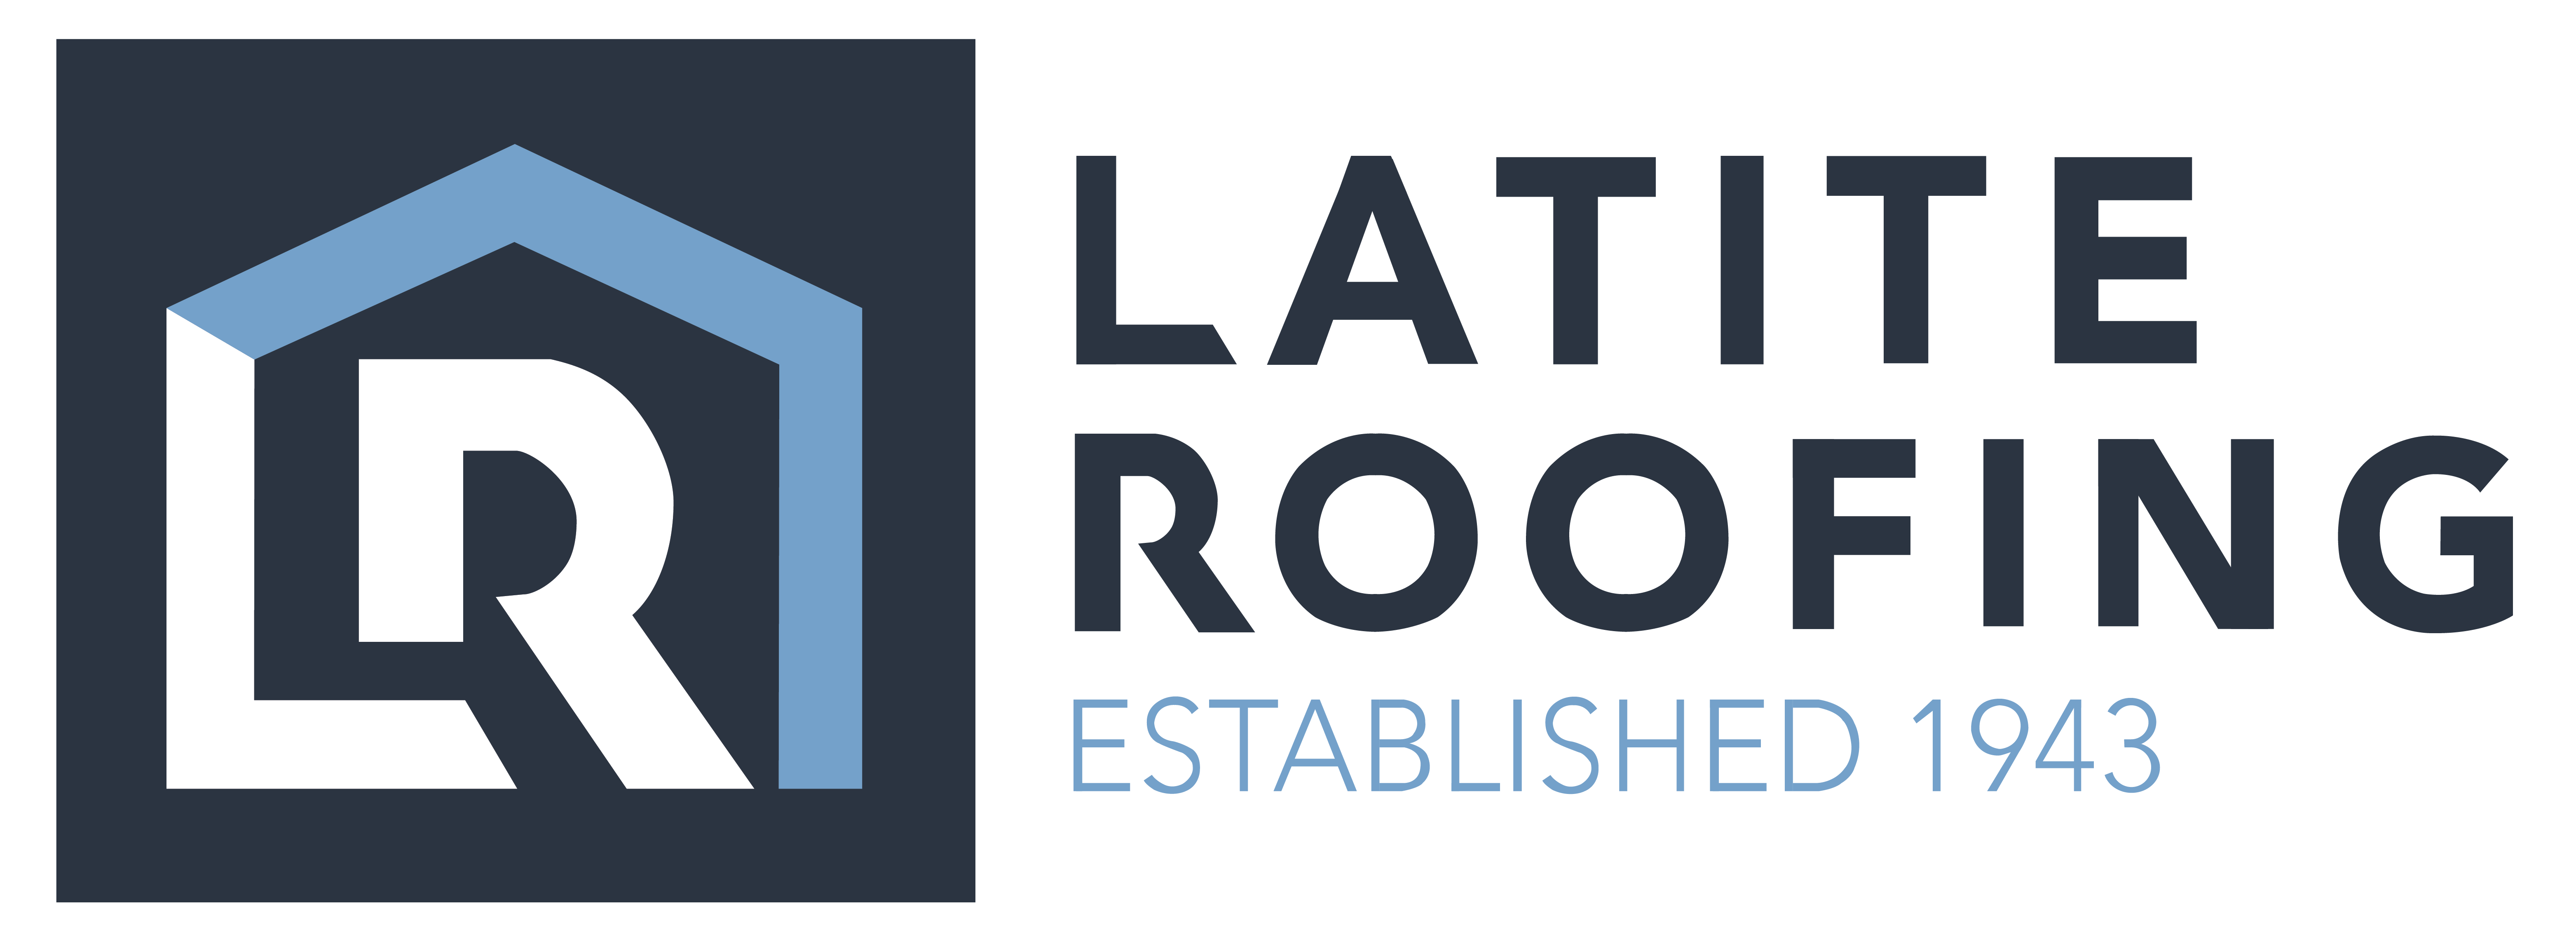 Latite Roofing roofing company in Florida